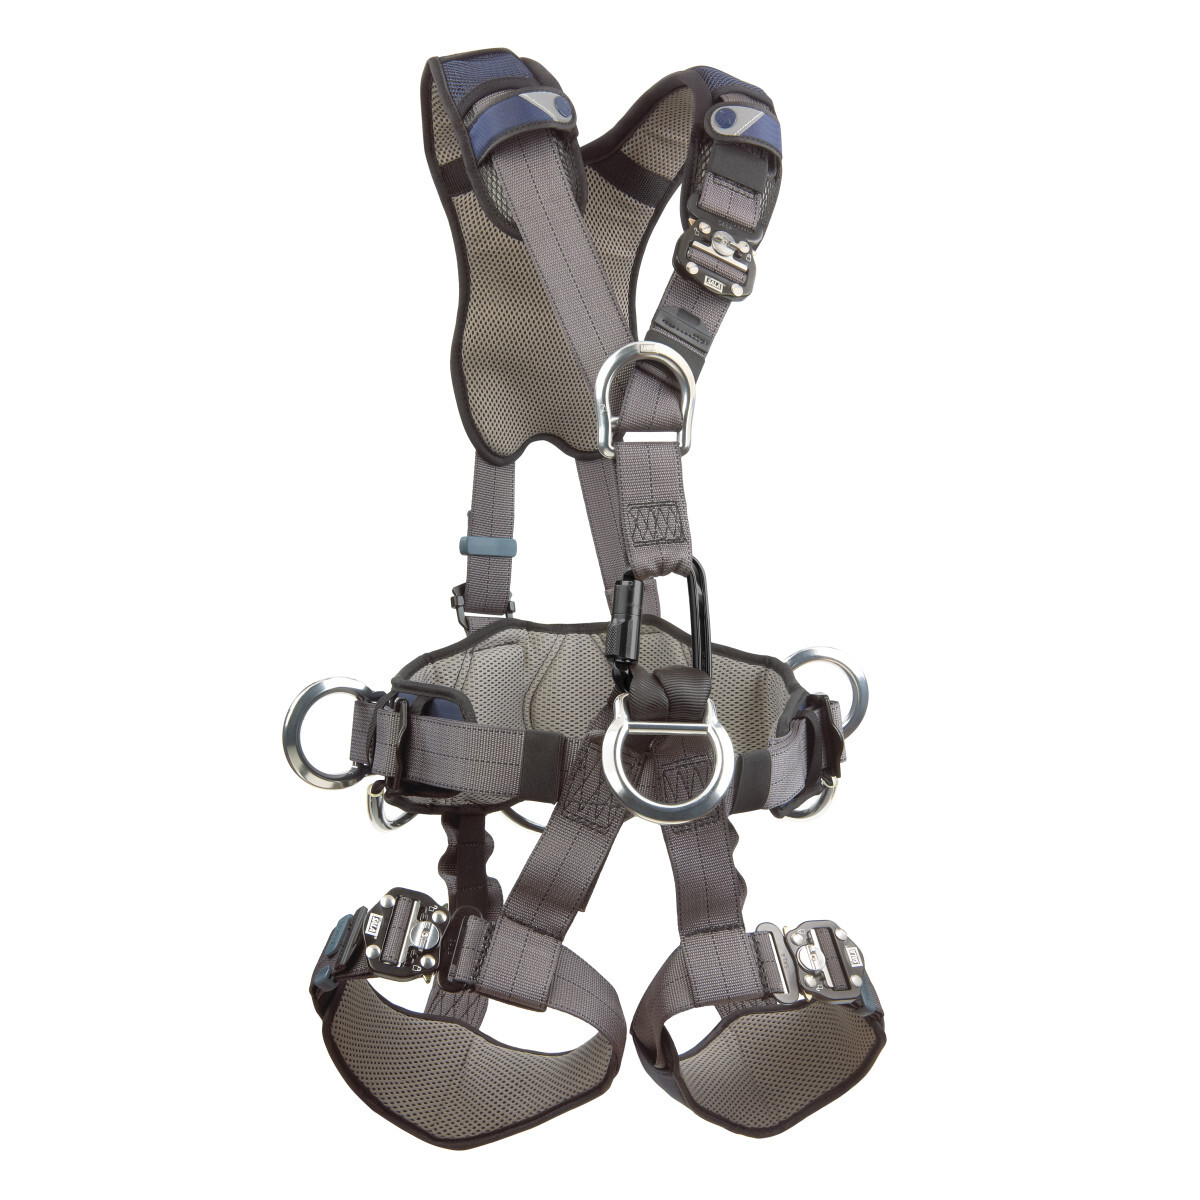 3M™ DBI-SALA® X-Large ExoFit NEX™ Full Body Style Harness With Back, Front, Suspension And Side D-Ring, Duo-Lok™ Quick Connect C